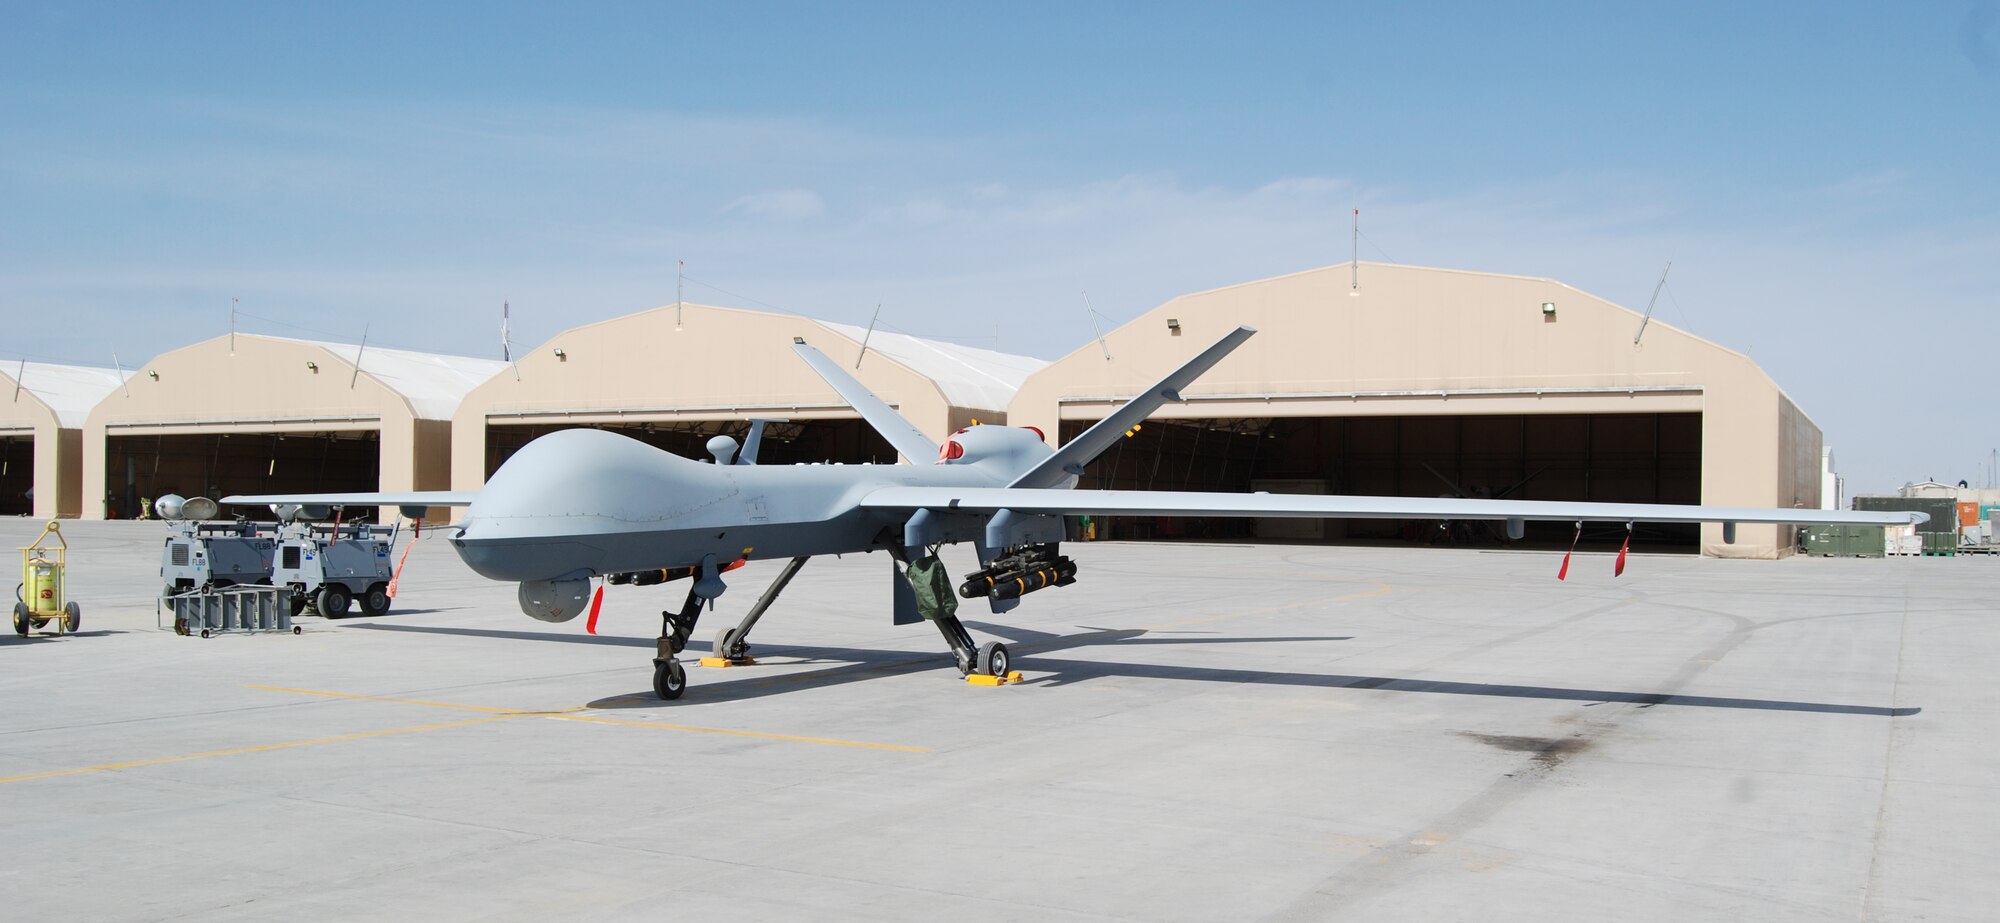 An MQ-9 Reaper sits on the ramp at Kandahar Airfield, March 19, 2014. The MQ-9 is assigned to and operated by the 451st Air Expeditionary Group. (U.S. Air Force photo by Capt. Brian Wagner/Released) (Image cropped to emphasize aircraft.)